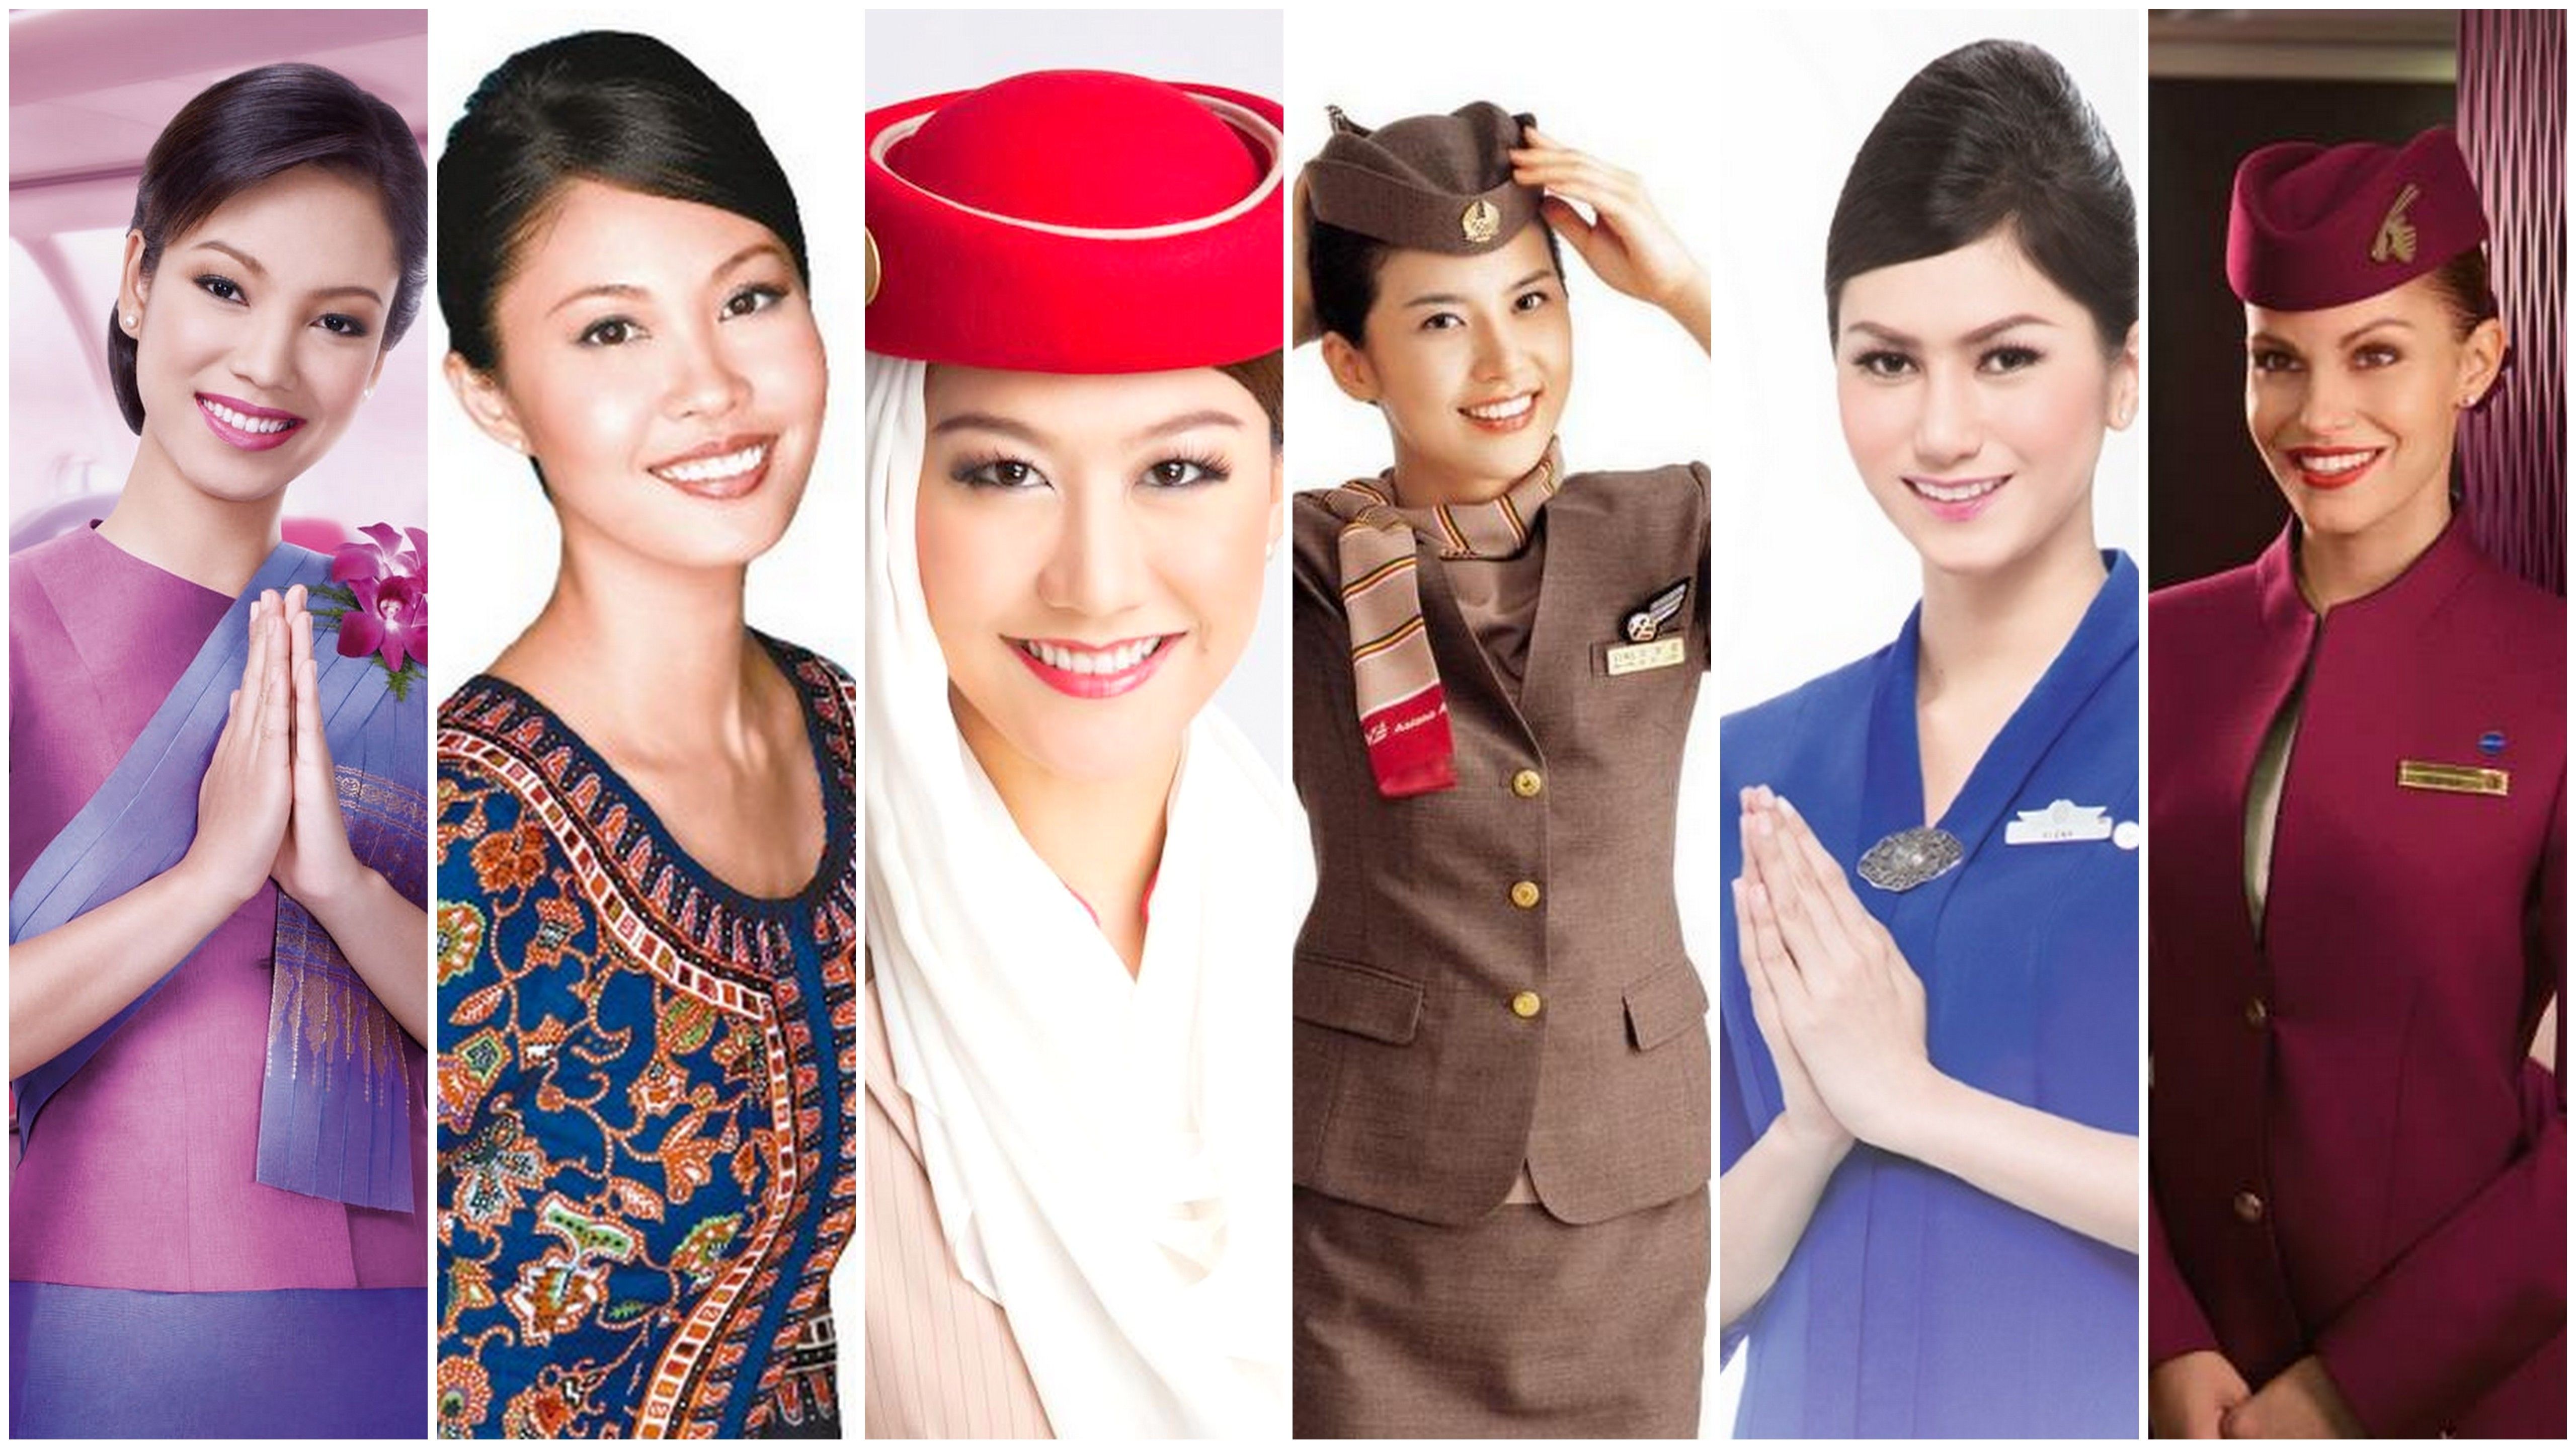 In Photos: The World's 10 Best Airline Cabin Crew - A Fly Guy.